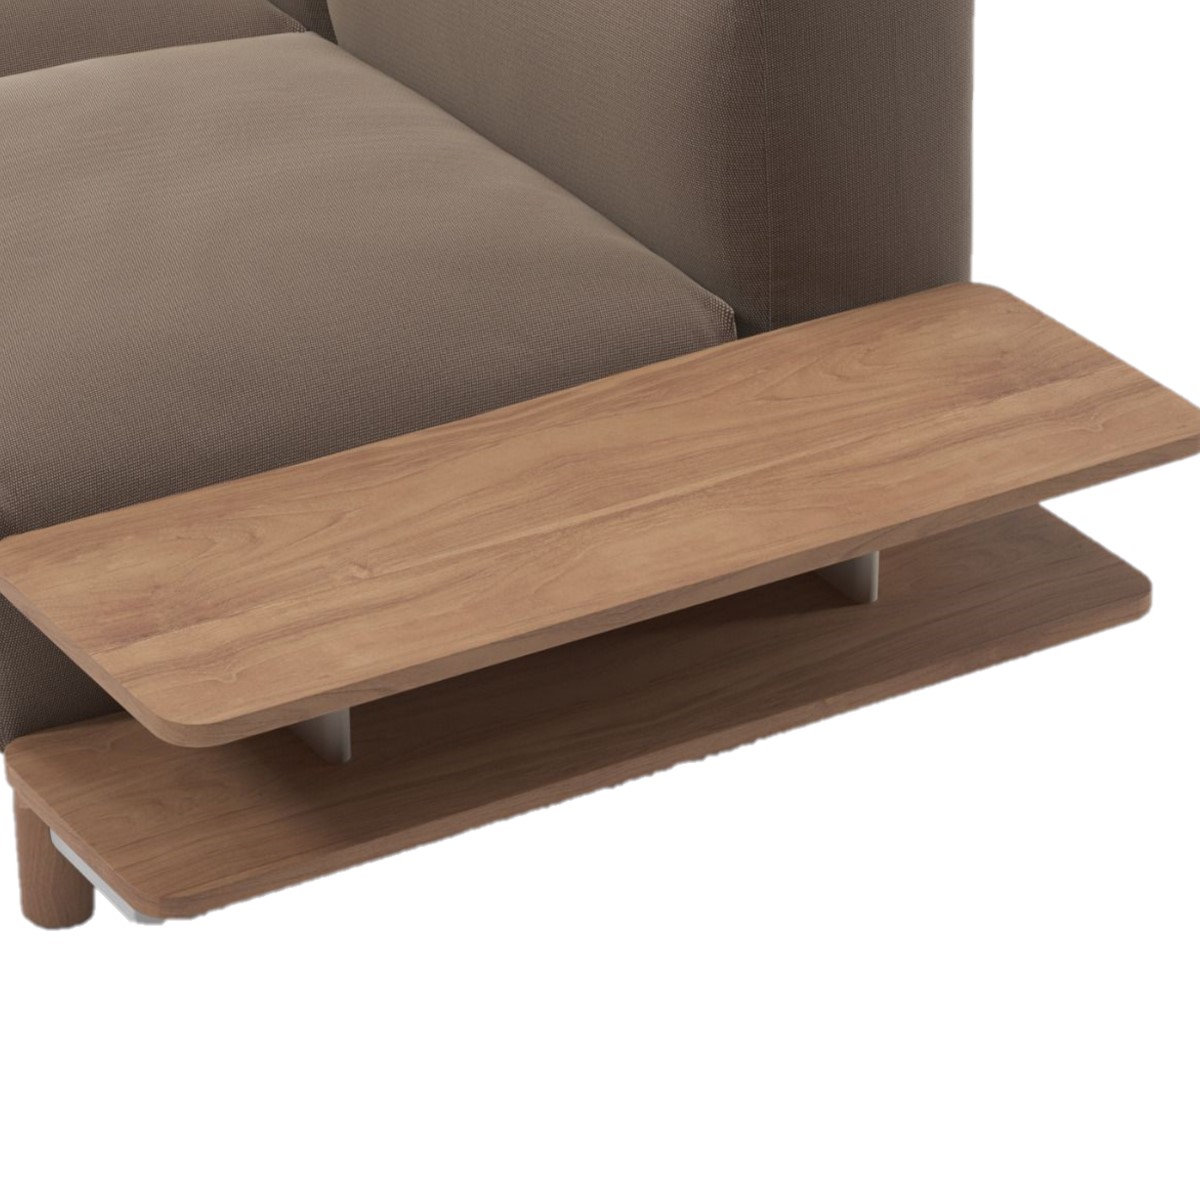 Product Image Molo Side Table